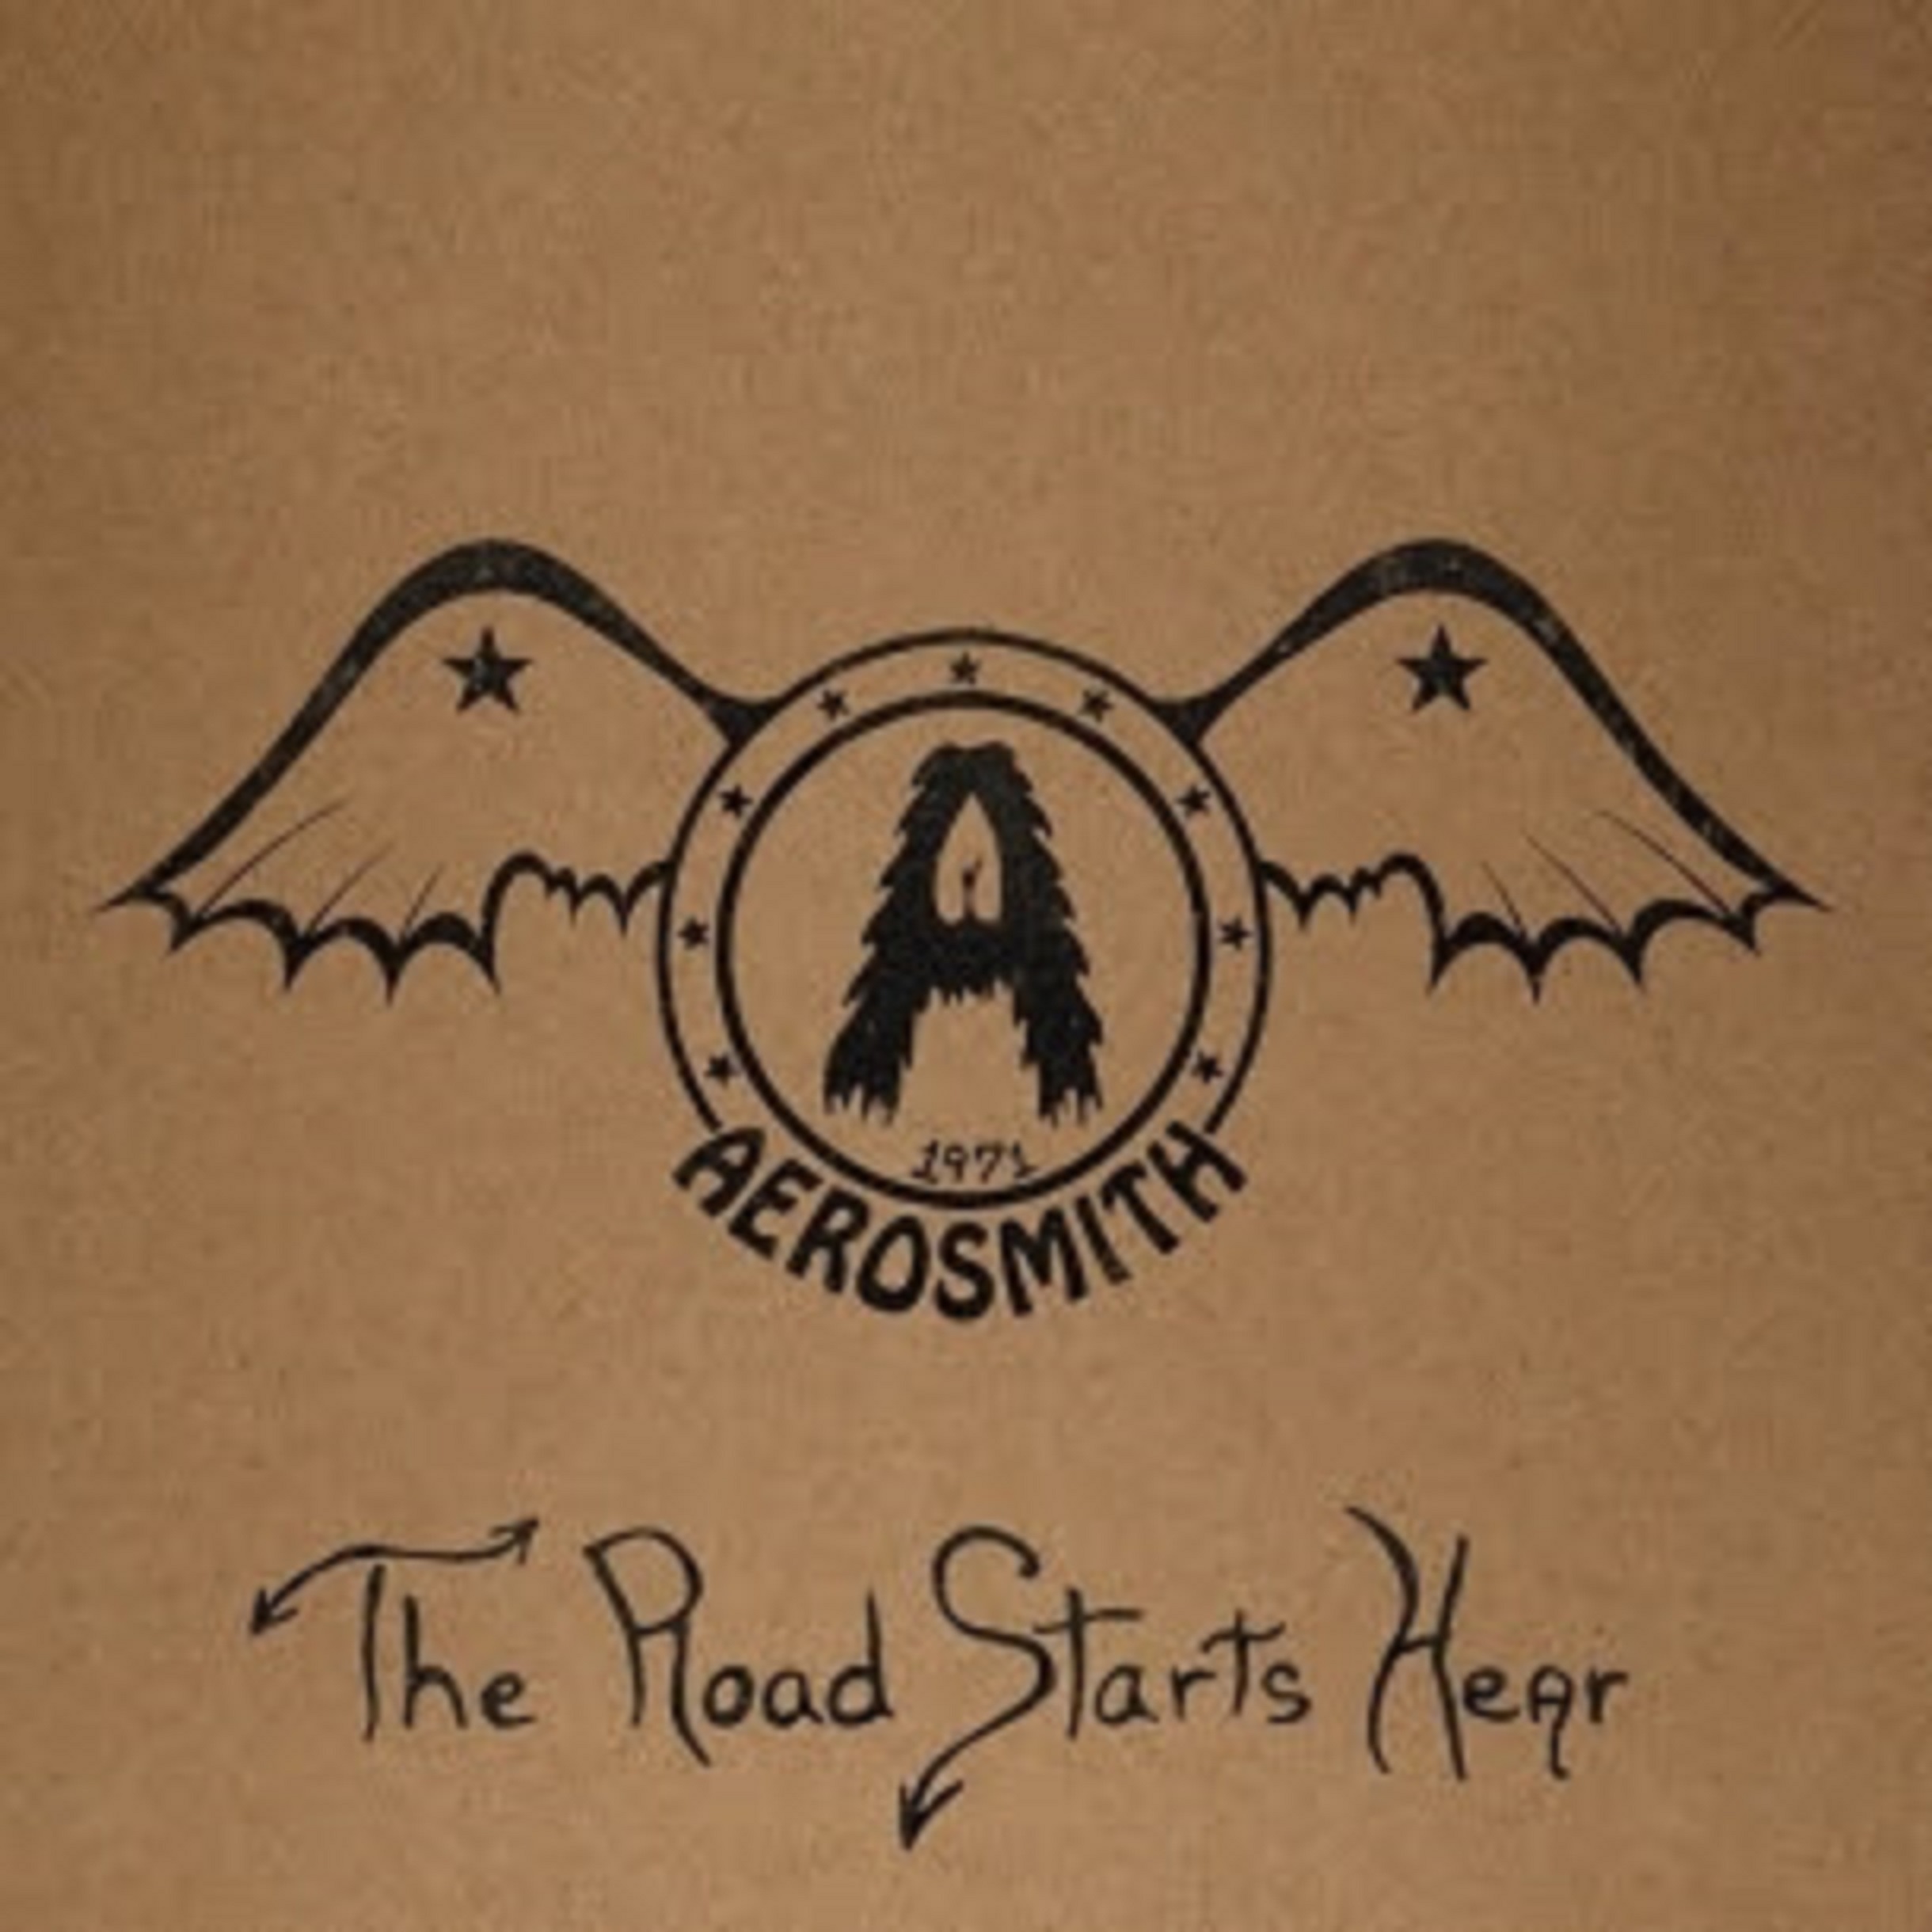 Aerosmith Drops Previously Unreleased Recording From 1971 On Vinyl And Limited Edition Cassette For Record Store Day